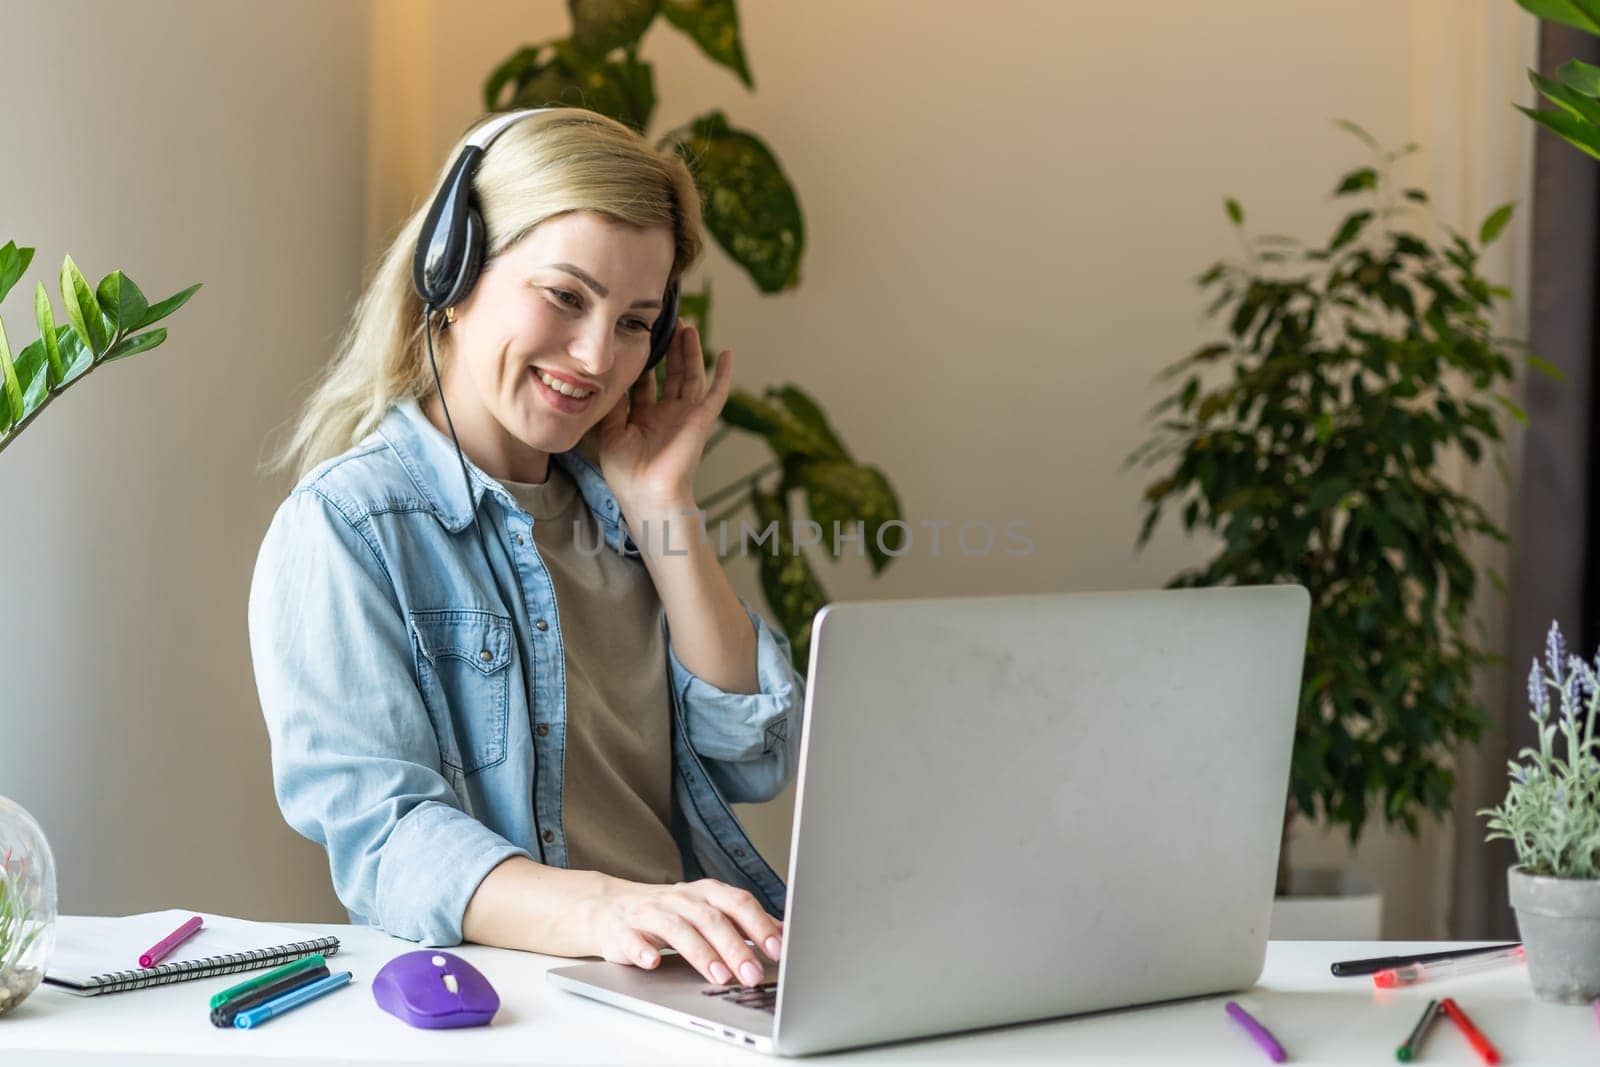 Meeting online. Young woman wearing headphones using laptop watching webinar or doing video chat by webcam. Business conference. E-learning education concept.